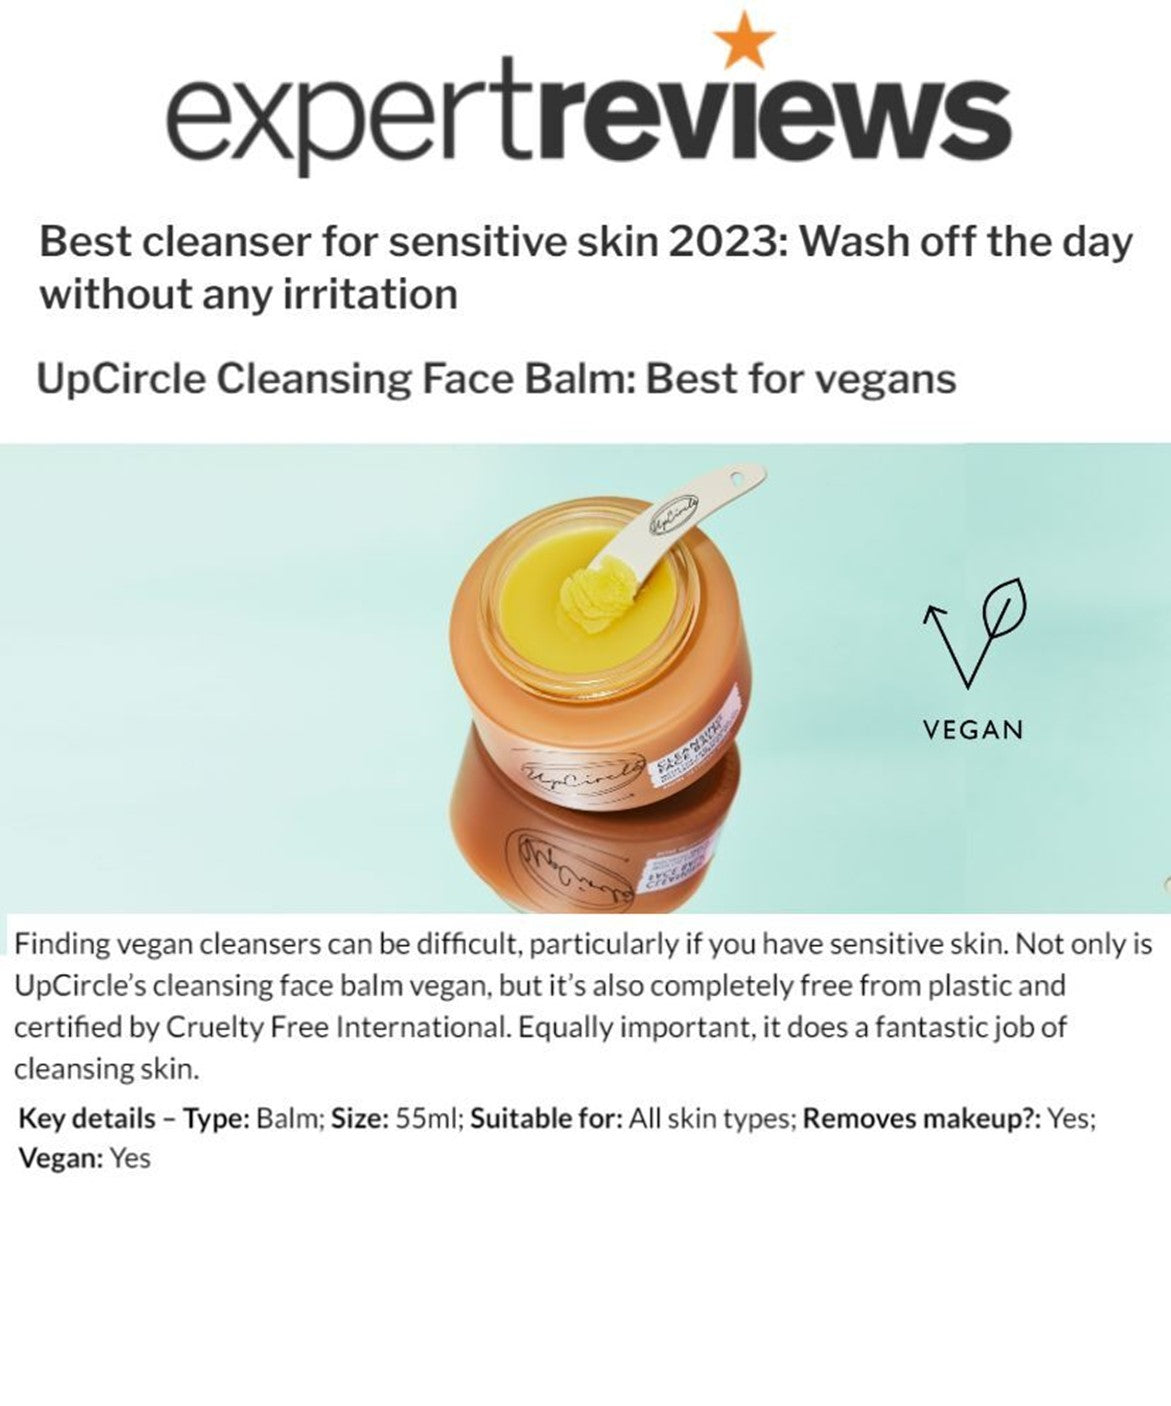 UpCircle Cleansing Face Balm With Oat Oil and Vitamin E